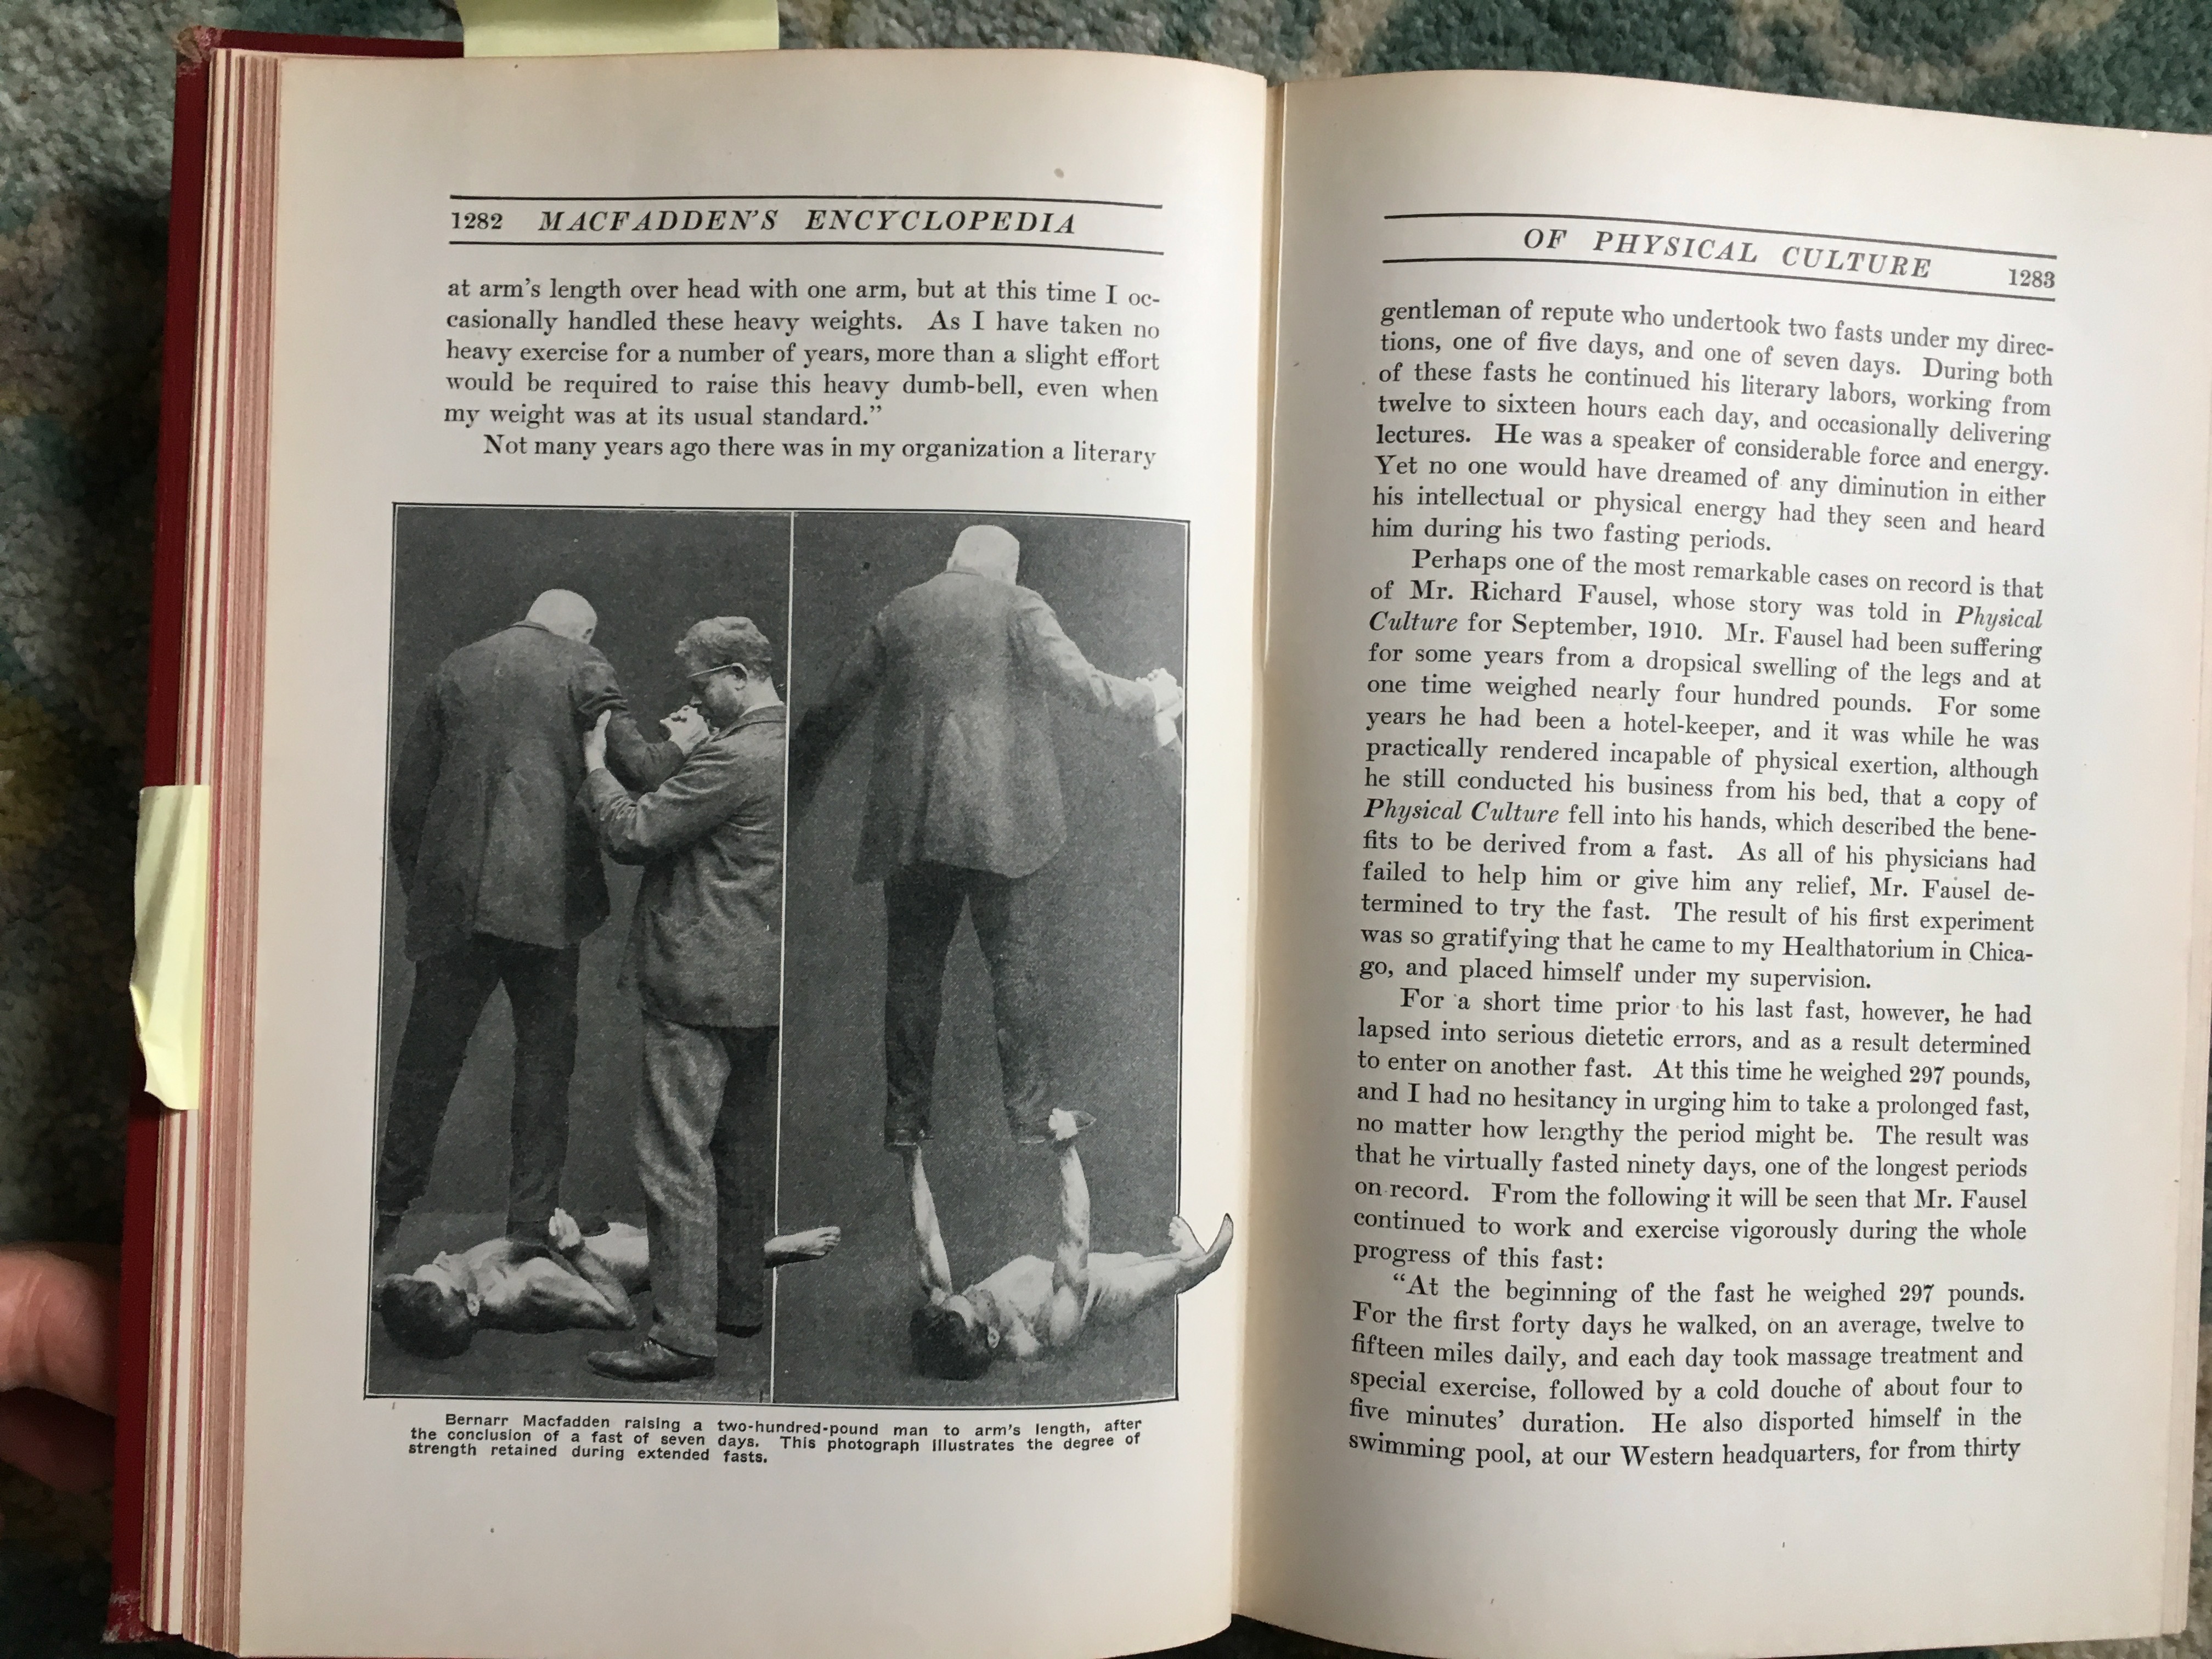 From the 1920 edition, in which MacFadden lifts a large man after fasting for a week.